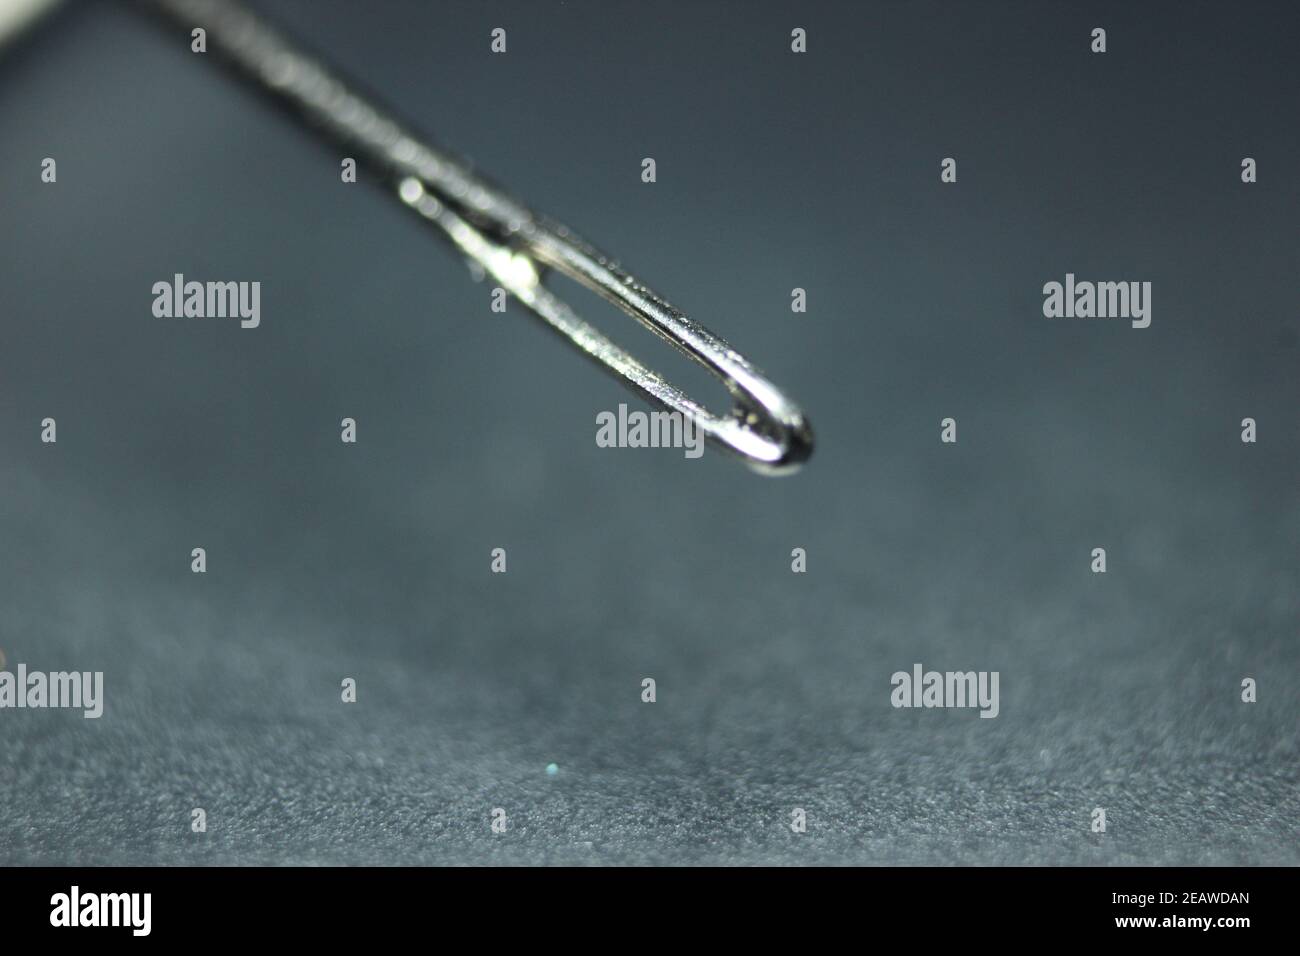 Small needle with empty eyelet, isolated over the black background. Stock Photo